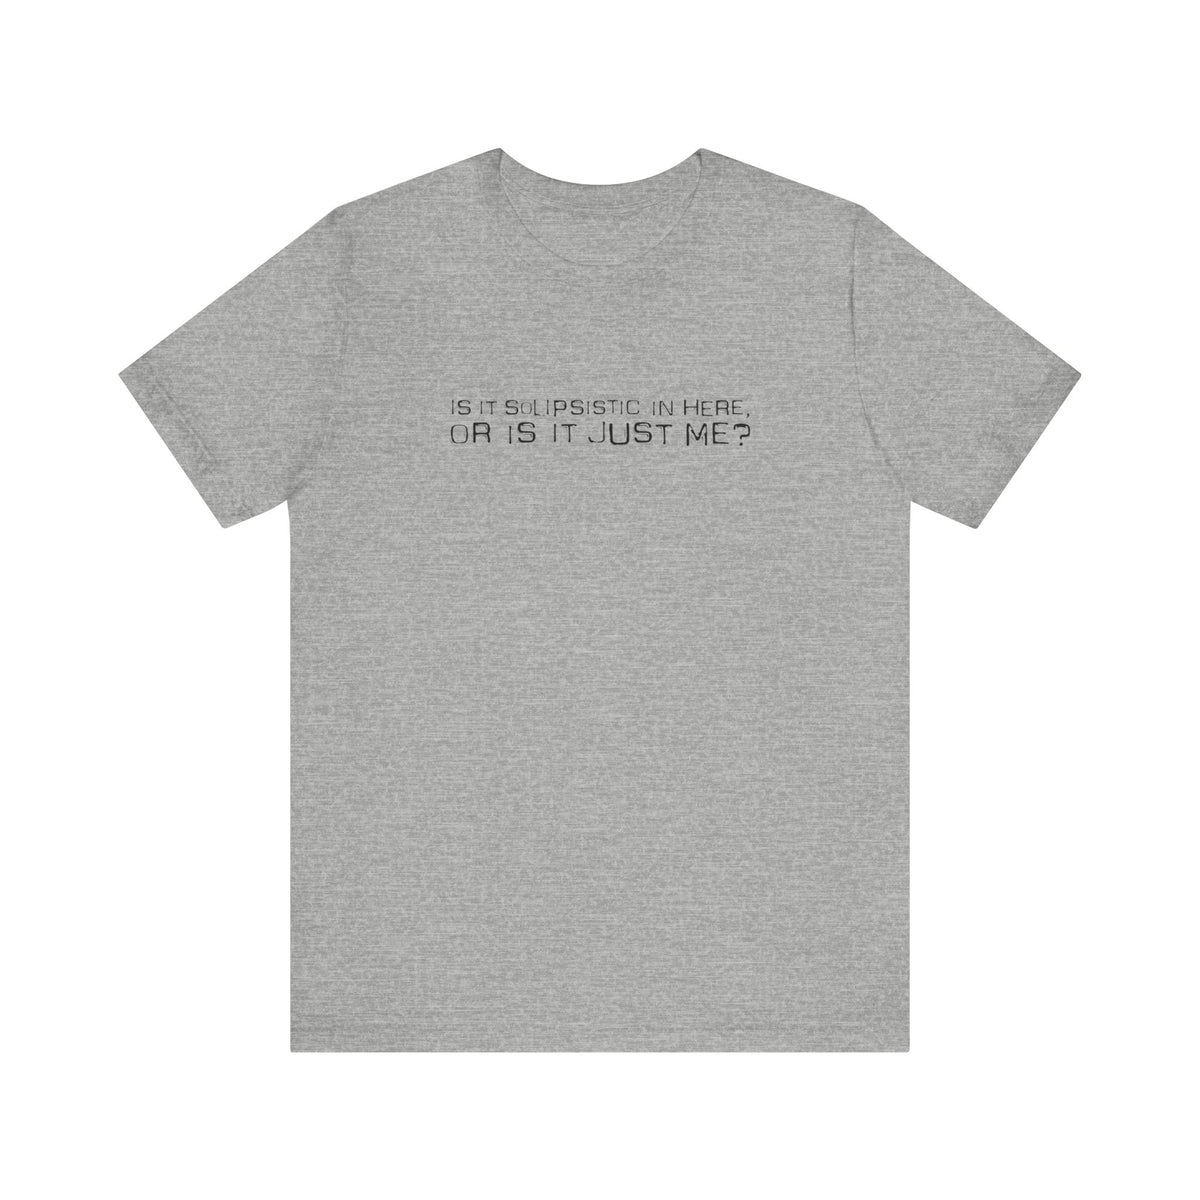 Is It Solipsistic In Here Or Is It Just Me? - Men's T-Shirt